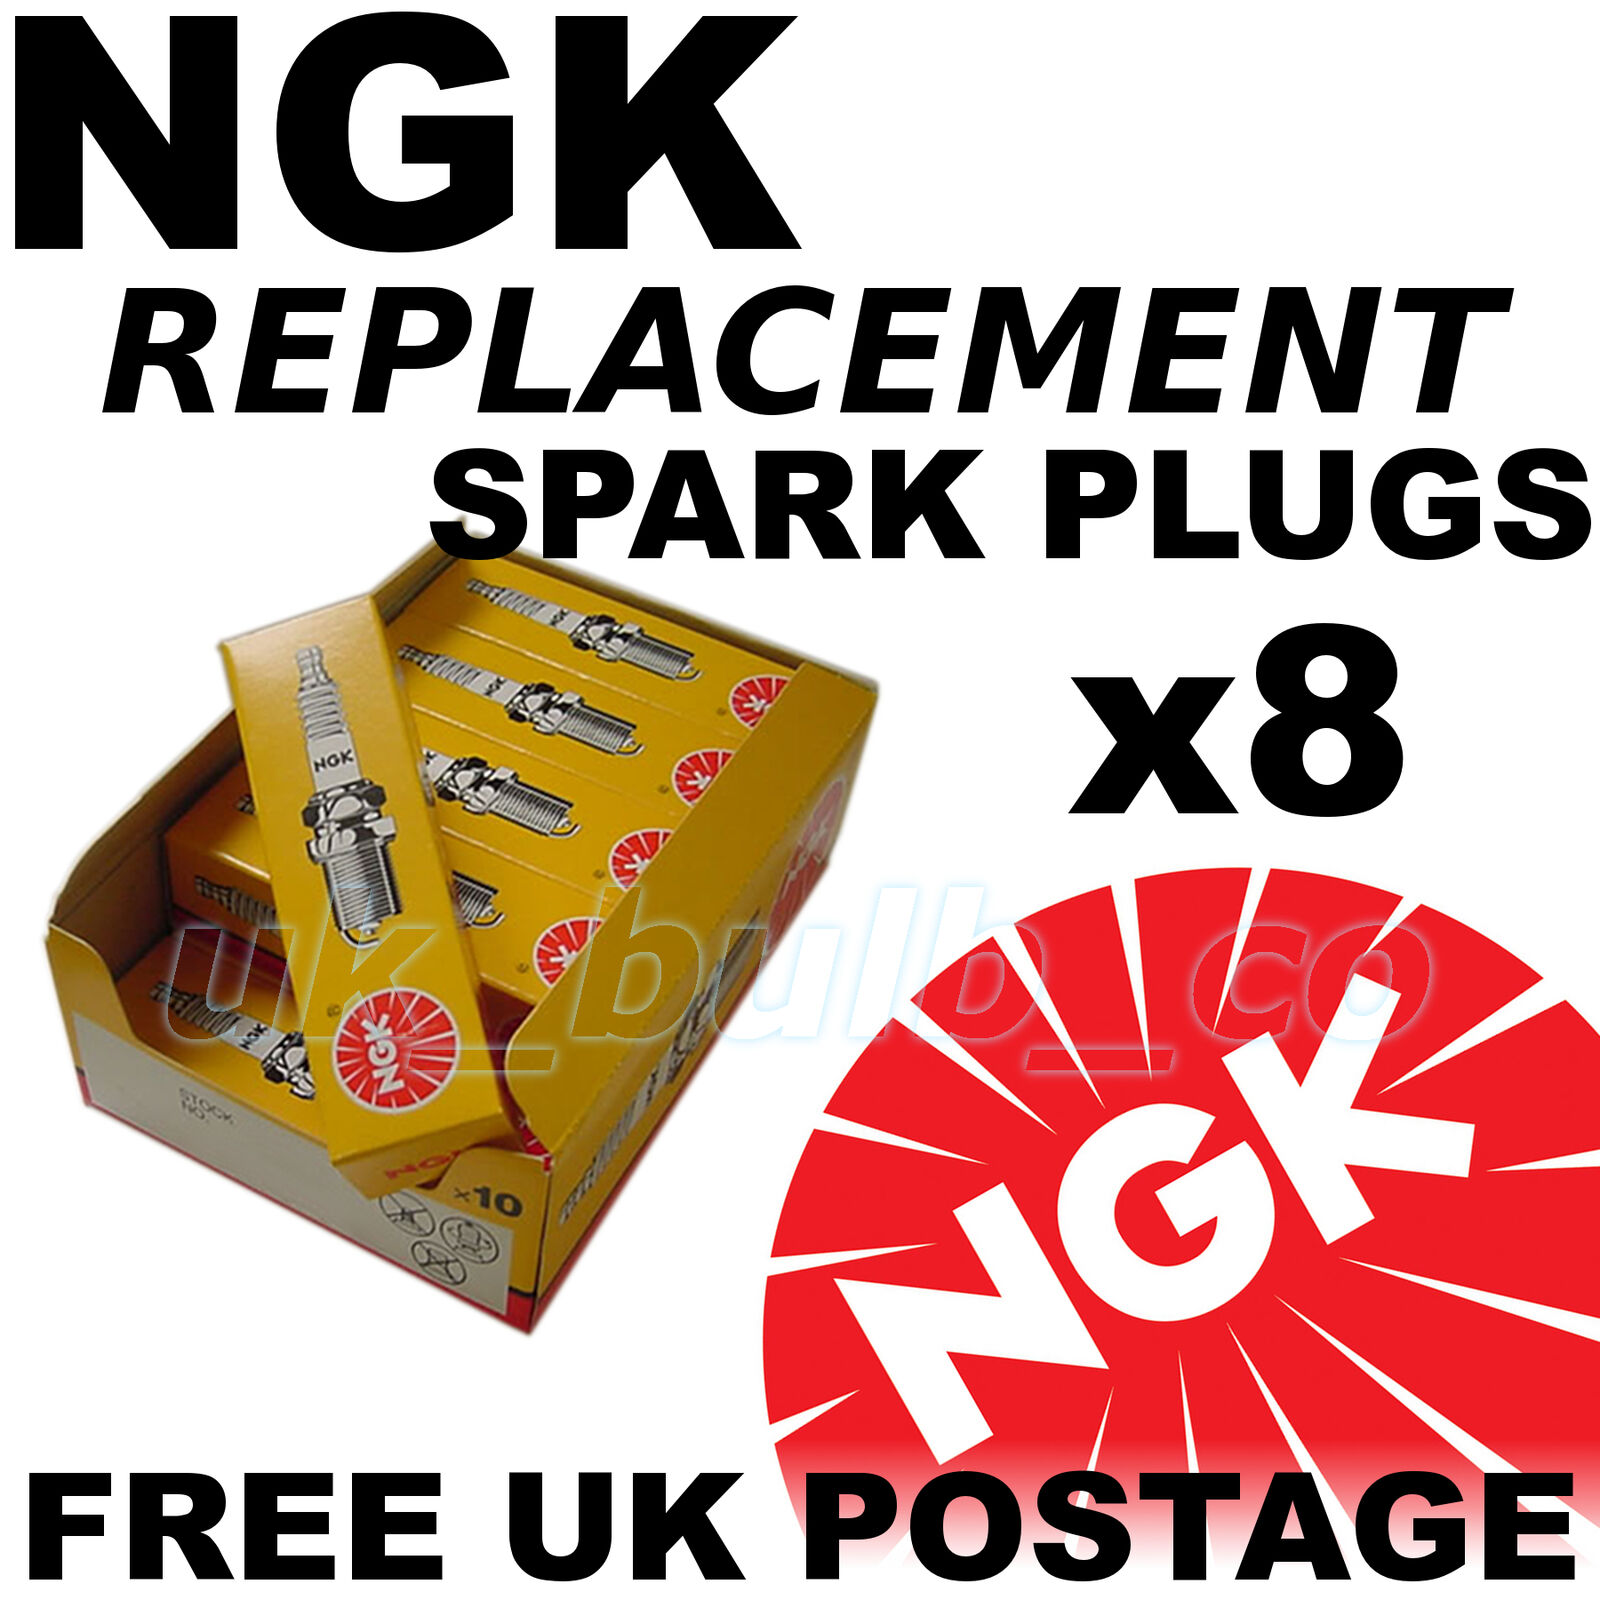 8x NGK Challenge the lowest price of Japan ☆ Replacement SPARK PLUGS ROLLS- SHADOW SILVER ROYCE l 6.75 Cheap SALE Start